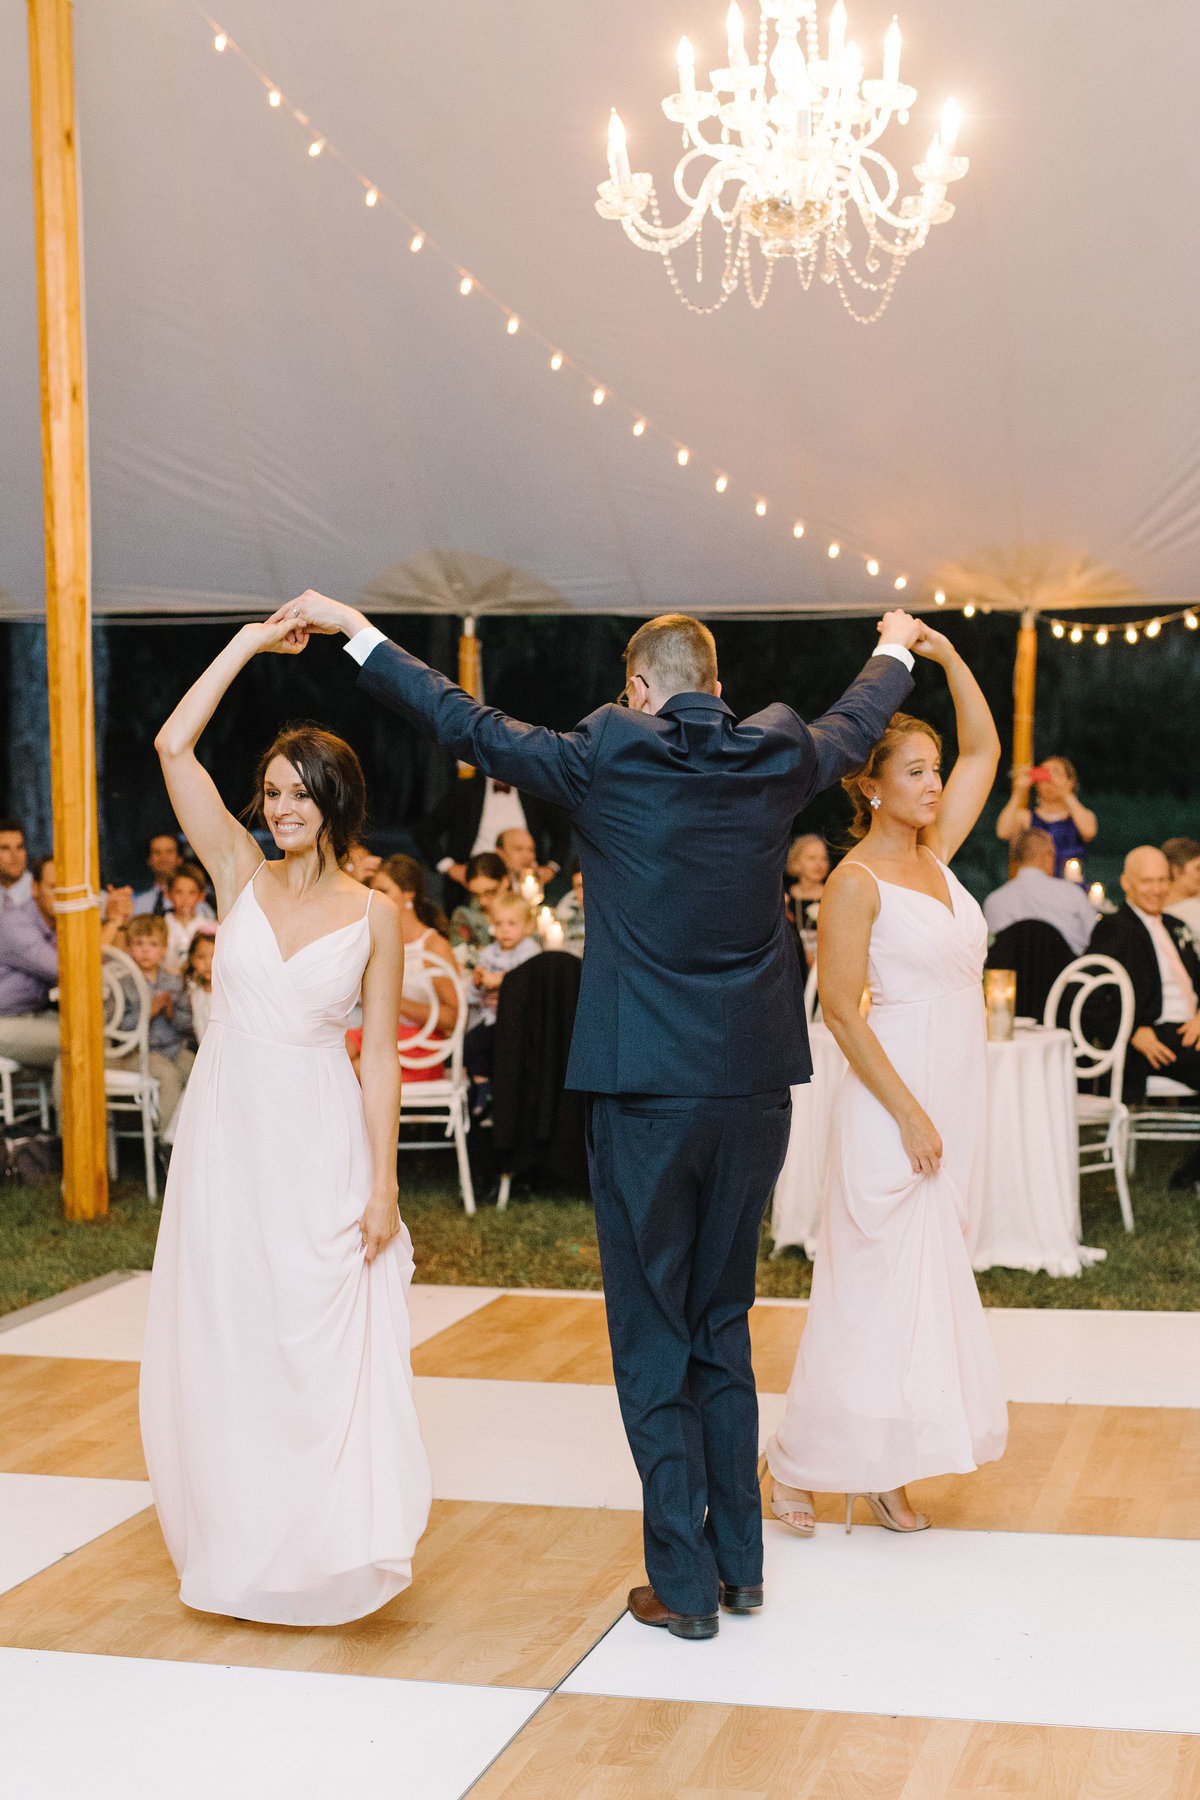 Wedding Party on Birch Wood and White checkered Dance Floor under Sailcloth Tent with Cafe Lighting and Crystal Chandeliers